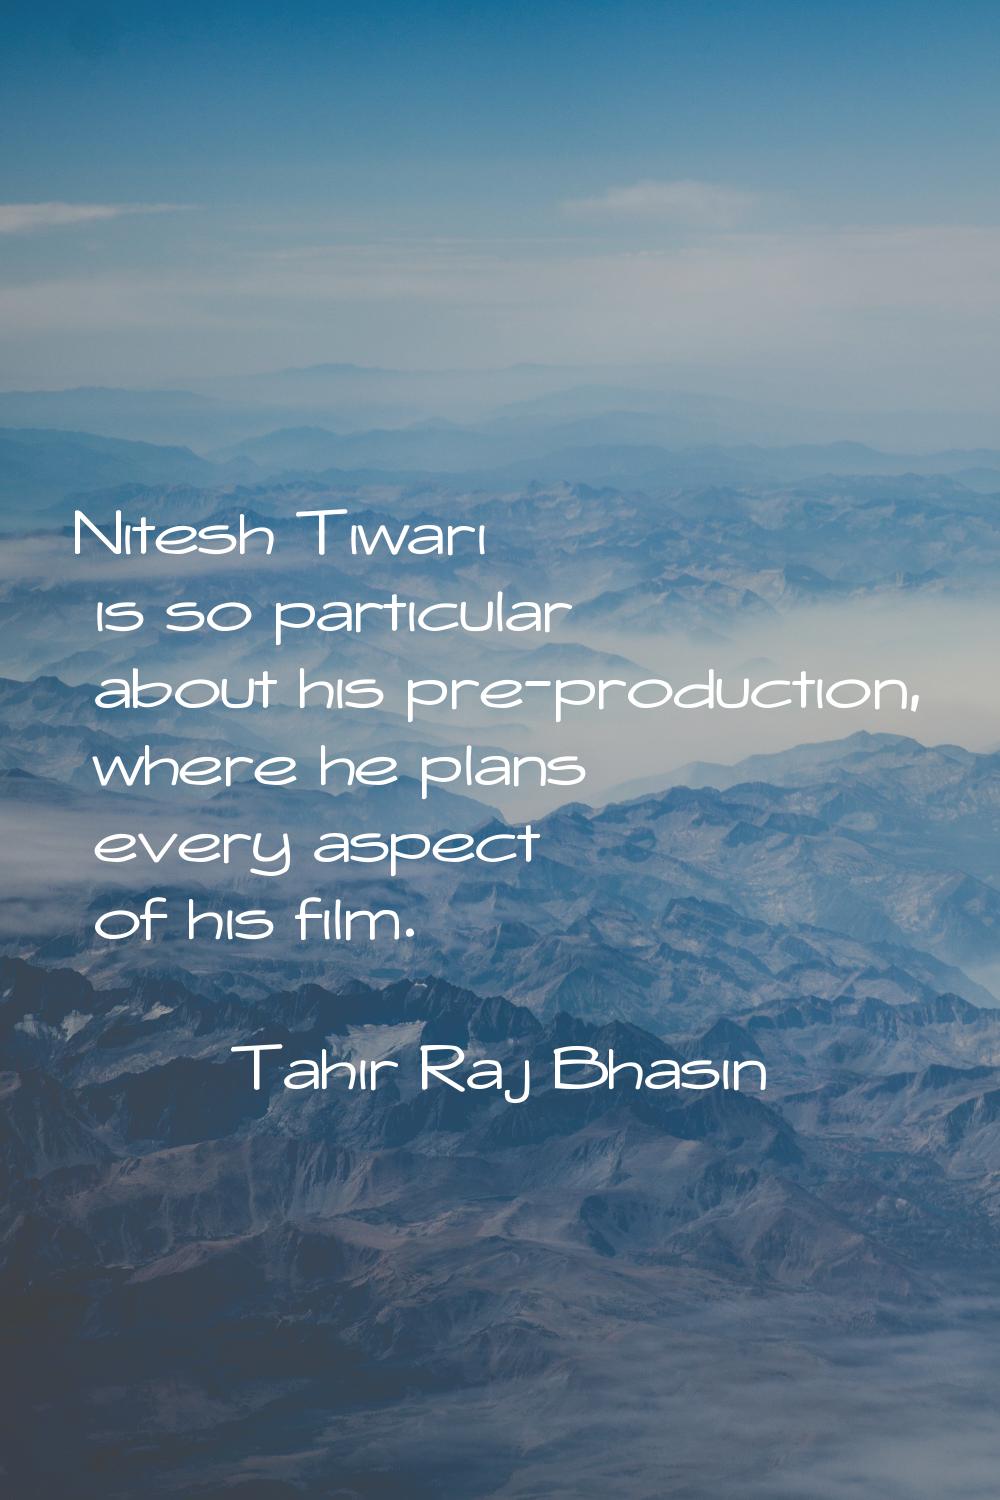 Nitesh Tiwari is so particular about his pre-production, where he plans every aspect of his film.